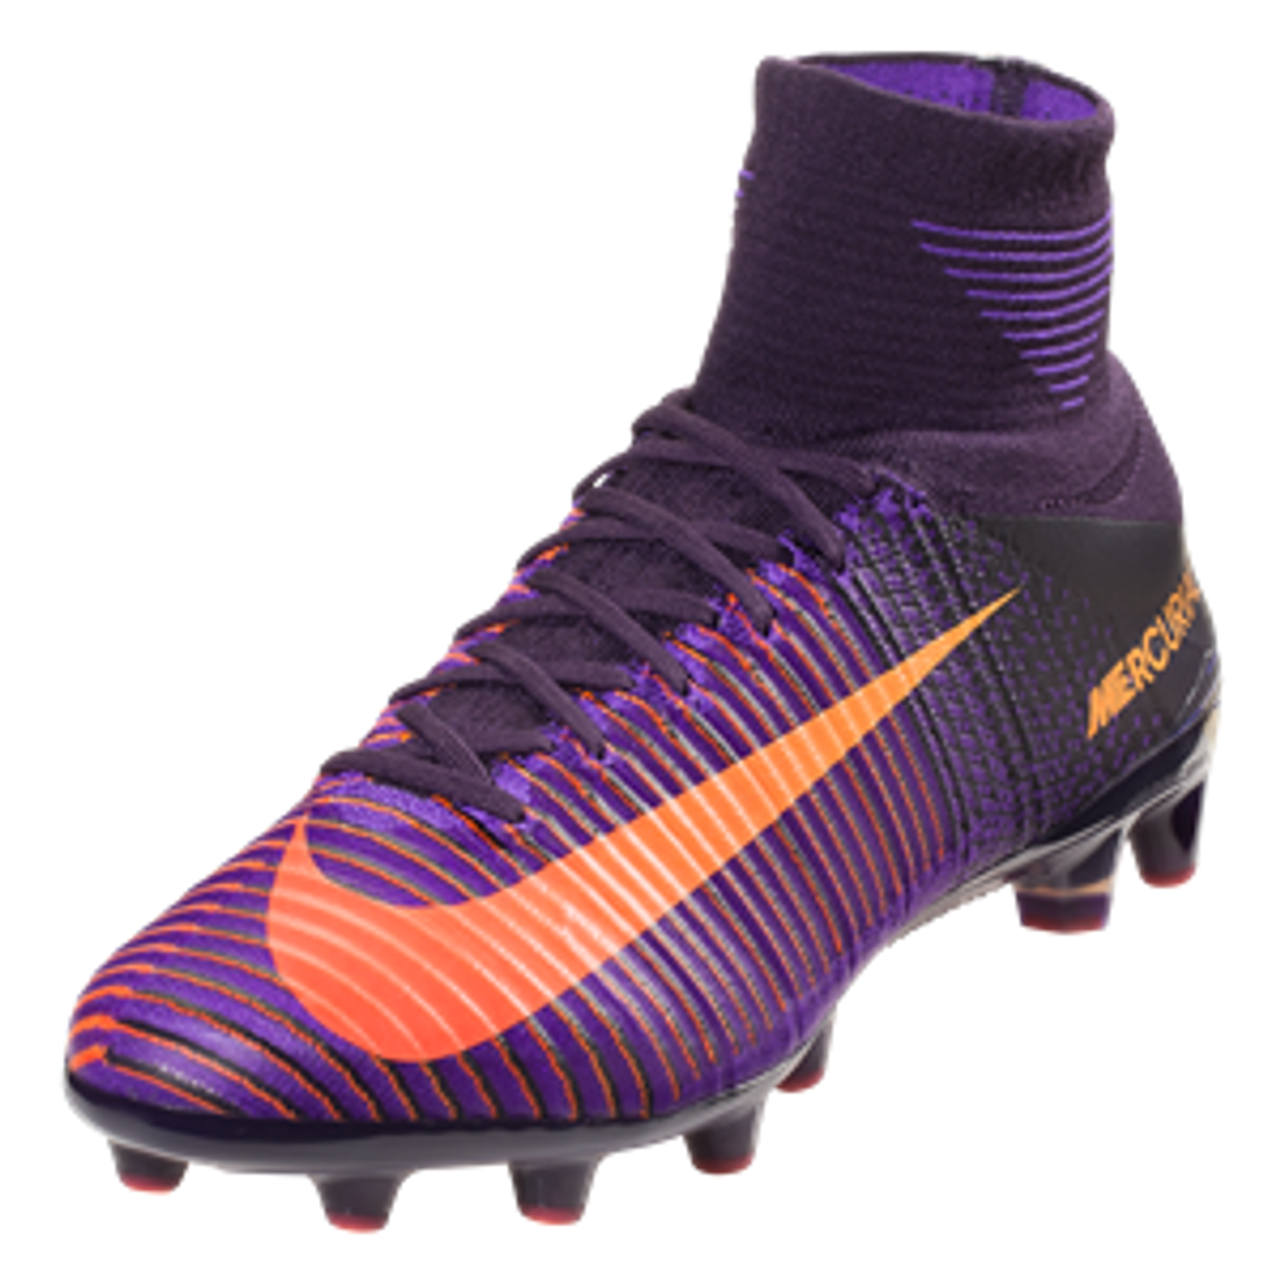 Nike Unisex's Superfly 6 Academy Fg/Mg TotOrg/Black Football Boots